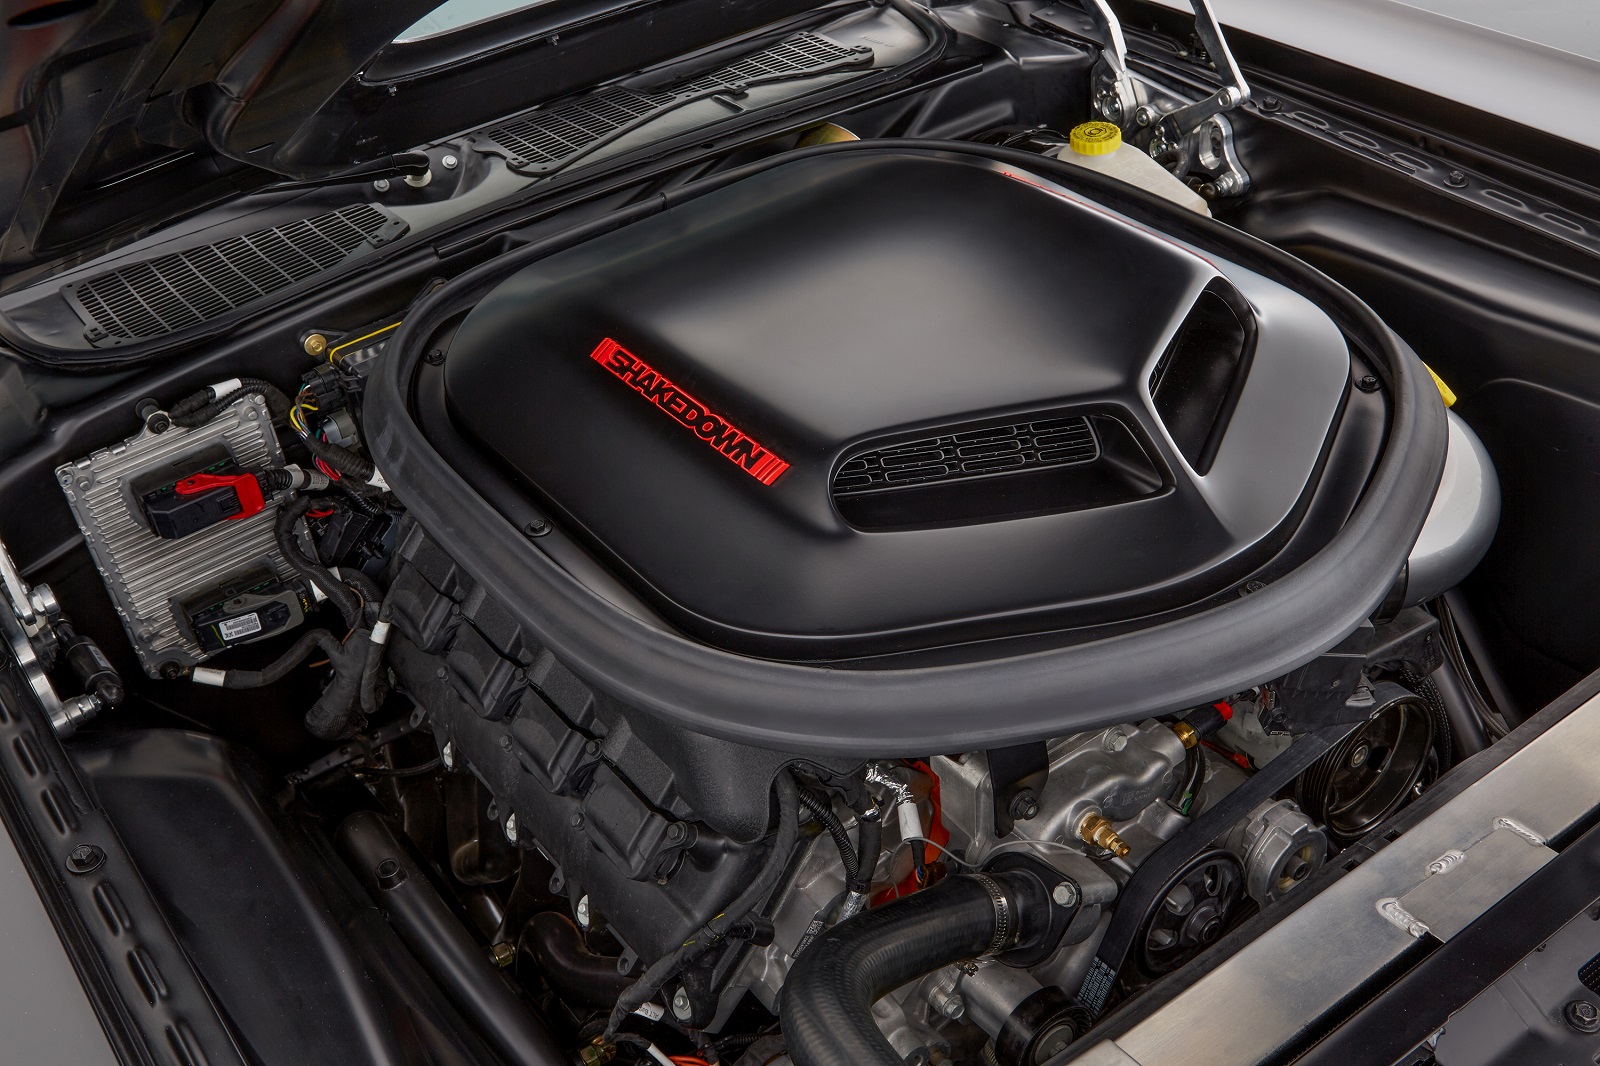 The Dodge Shakedown Challenger, a blend of design cues from the past and present, features a new Mopar 392 Crate HEMI® Engine Kit under the hood to help administer a 6.4-liter HEMI® jolt to the heart of the classic 1971 Challenger.